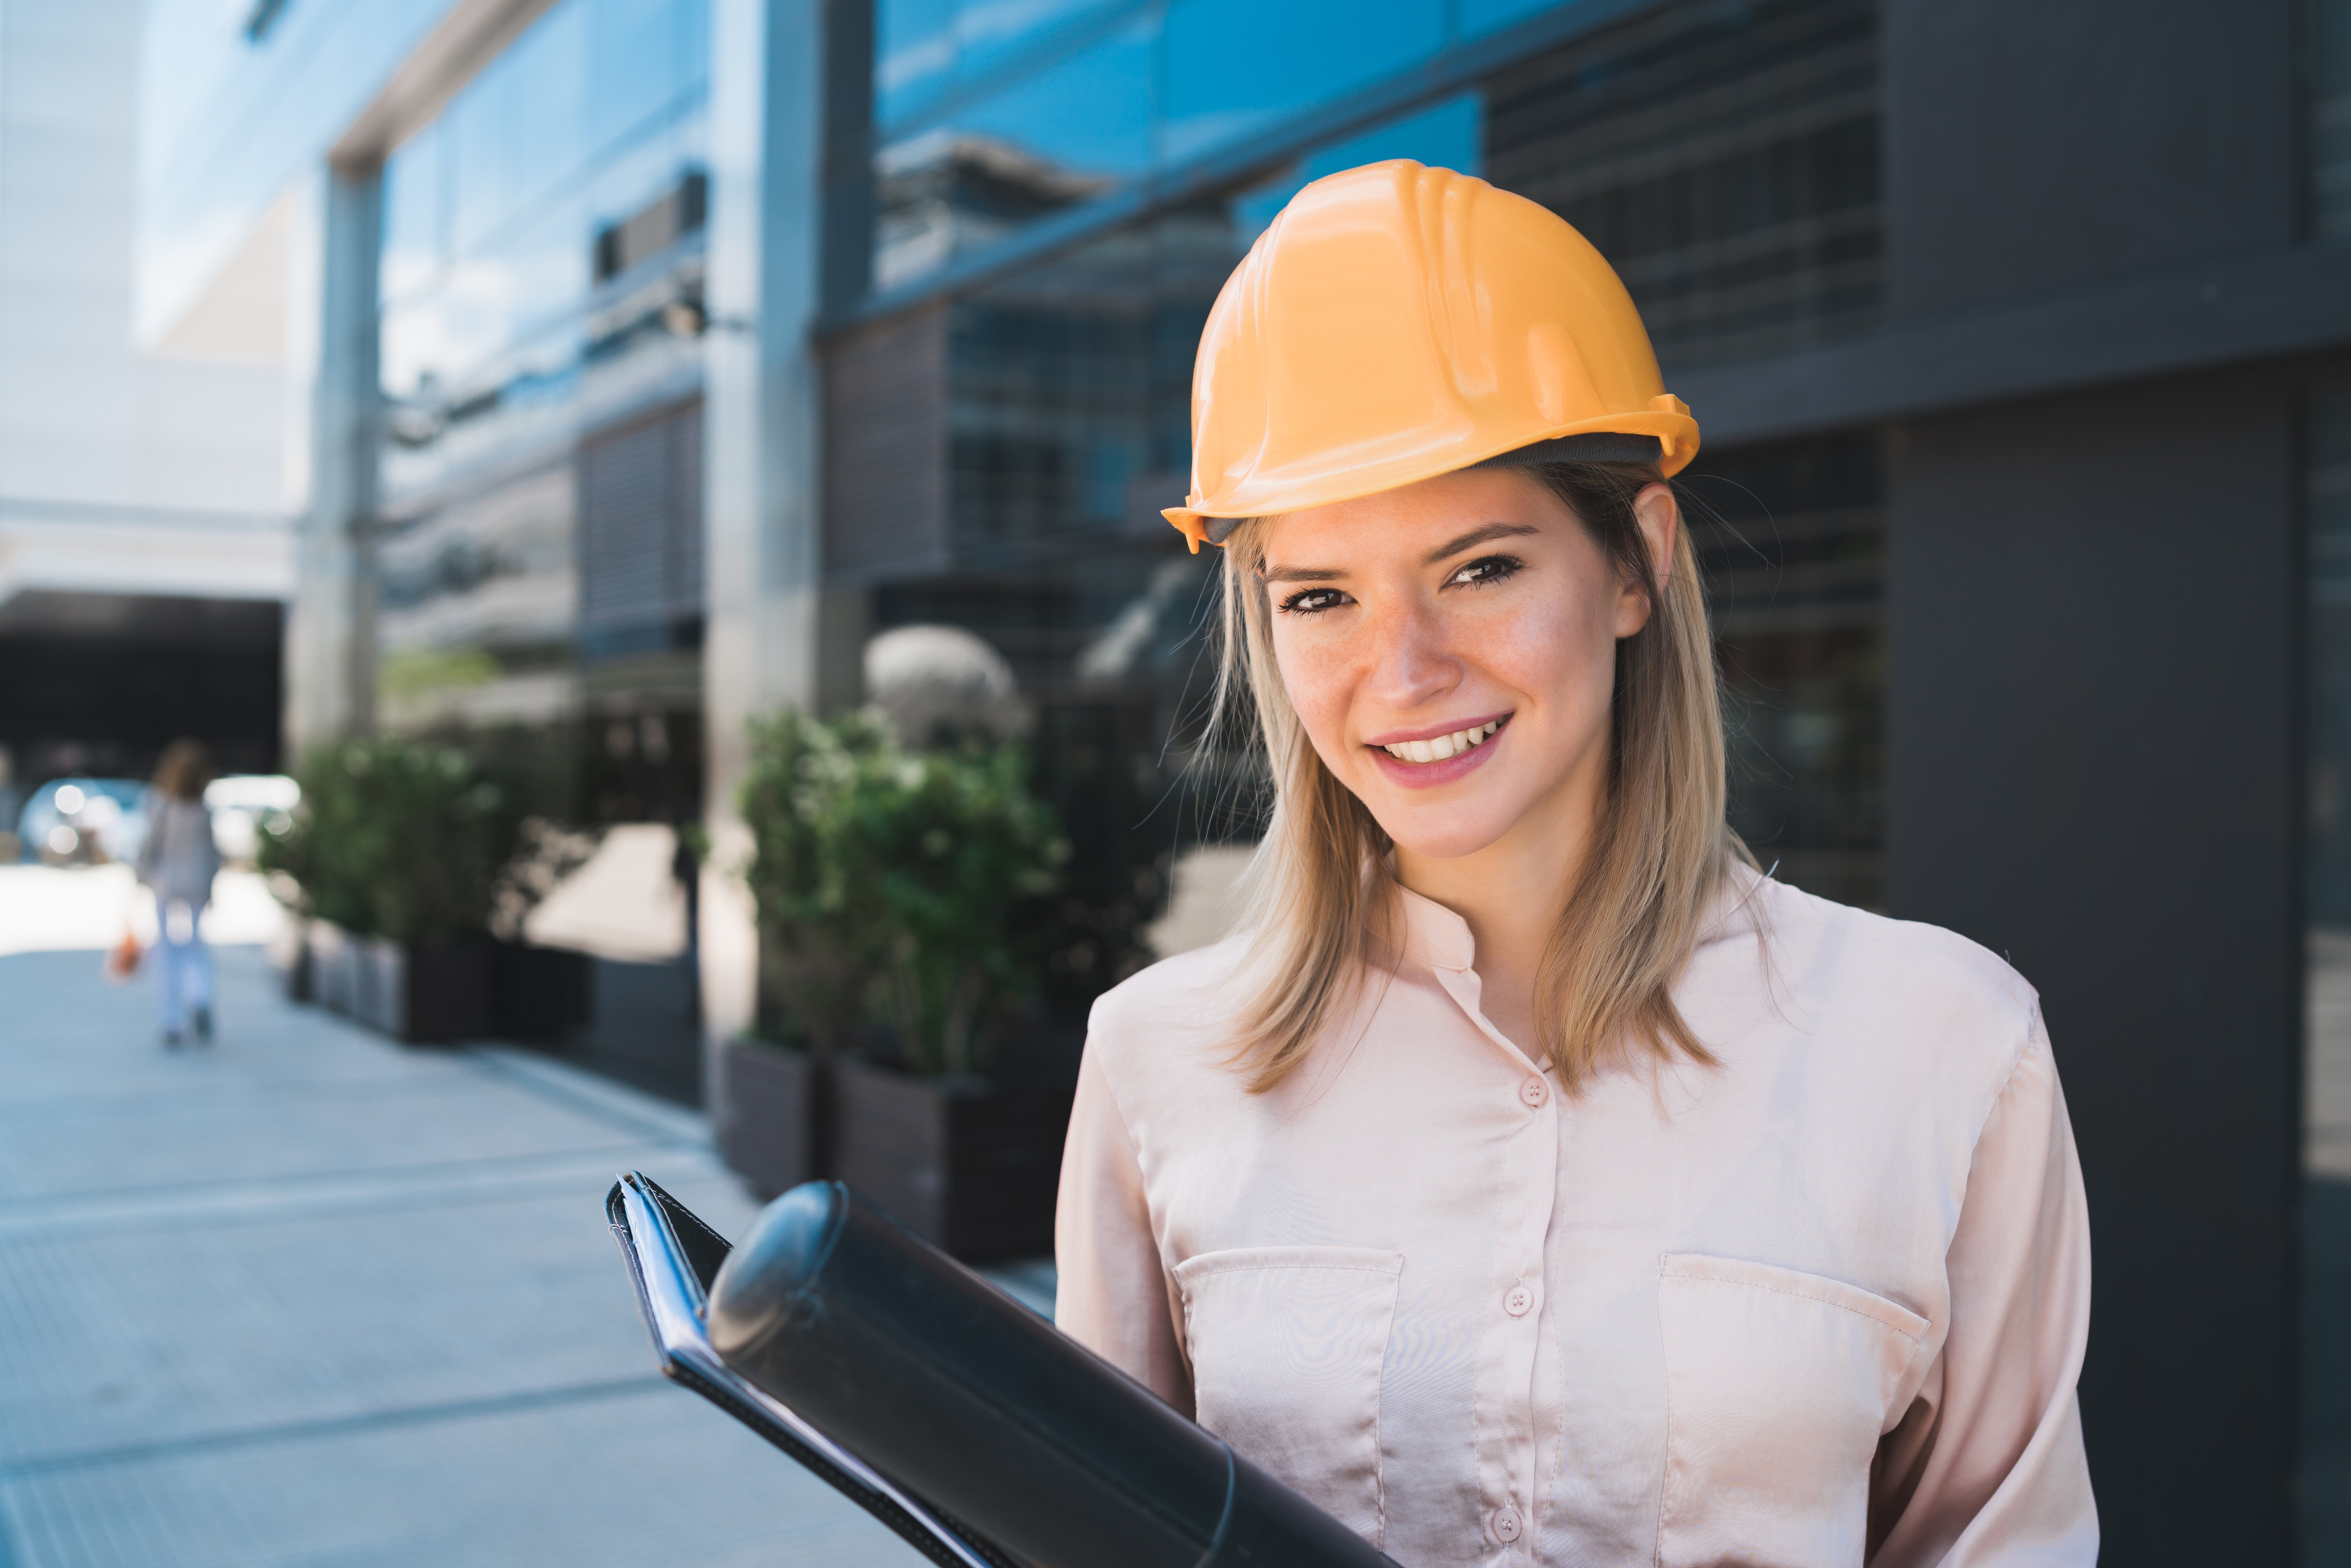 portrait-of-professional-architect-woman-wearing-yellow-helmet-and-standing-outdoors-engineer-and-architect-concept